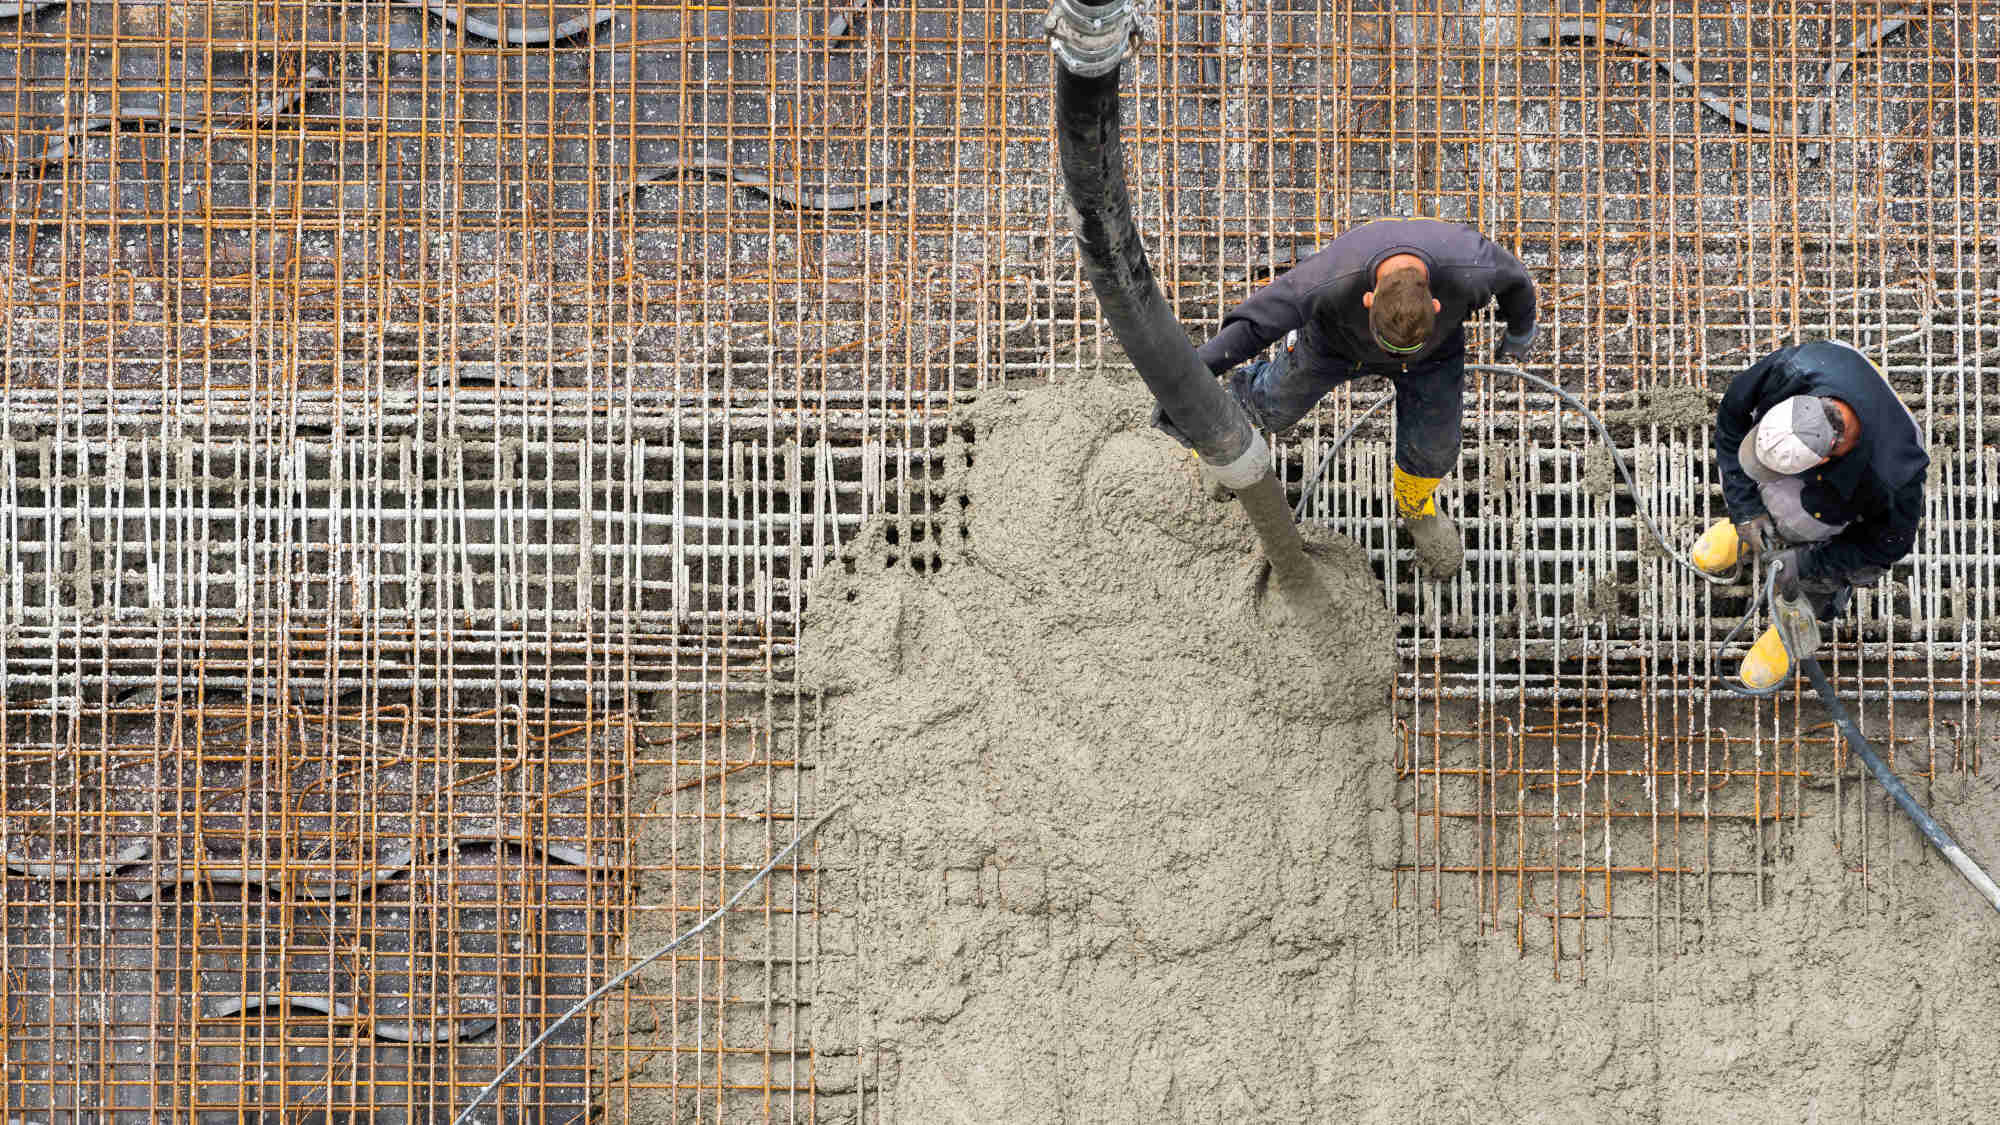 A bird's eye view of two men pouring cement